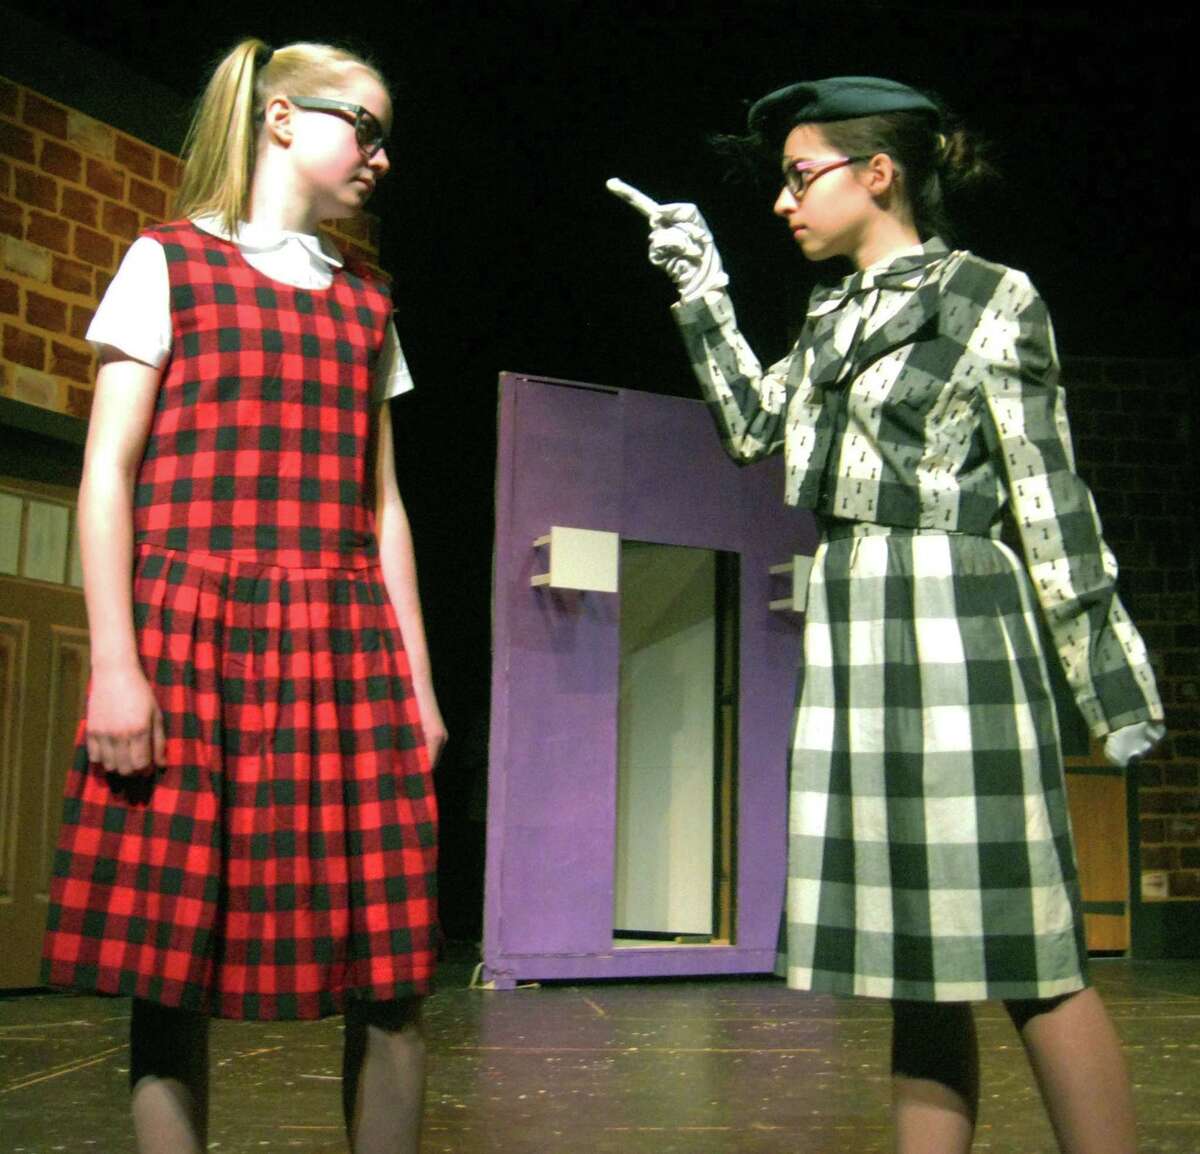 Penny, portrayed by Abigail Gorra, left, of Washington, endures an earful from Mallory Noone of Washington as Prudy Pingleton during rehearsal for Shepaug Valley Middle School's April 10, 2014 performance of "Hairspray Jr." Courtesy of Cheryl Crossley